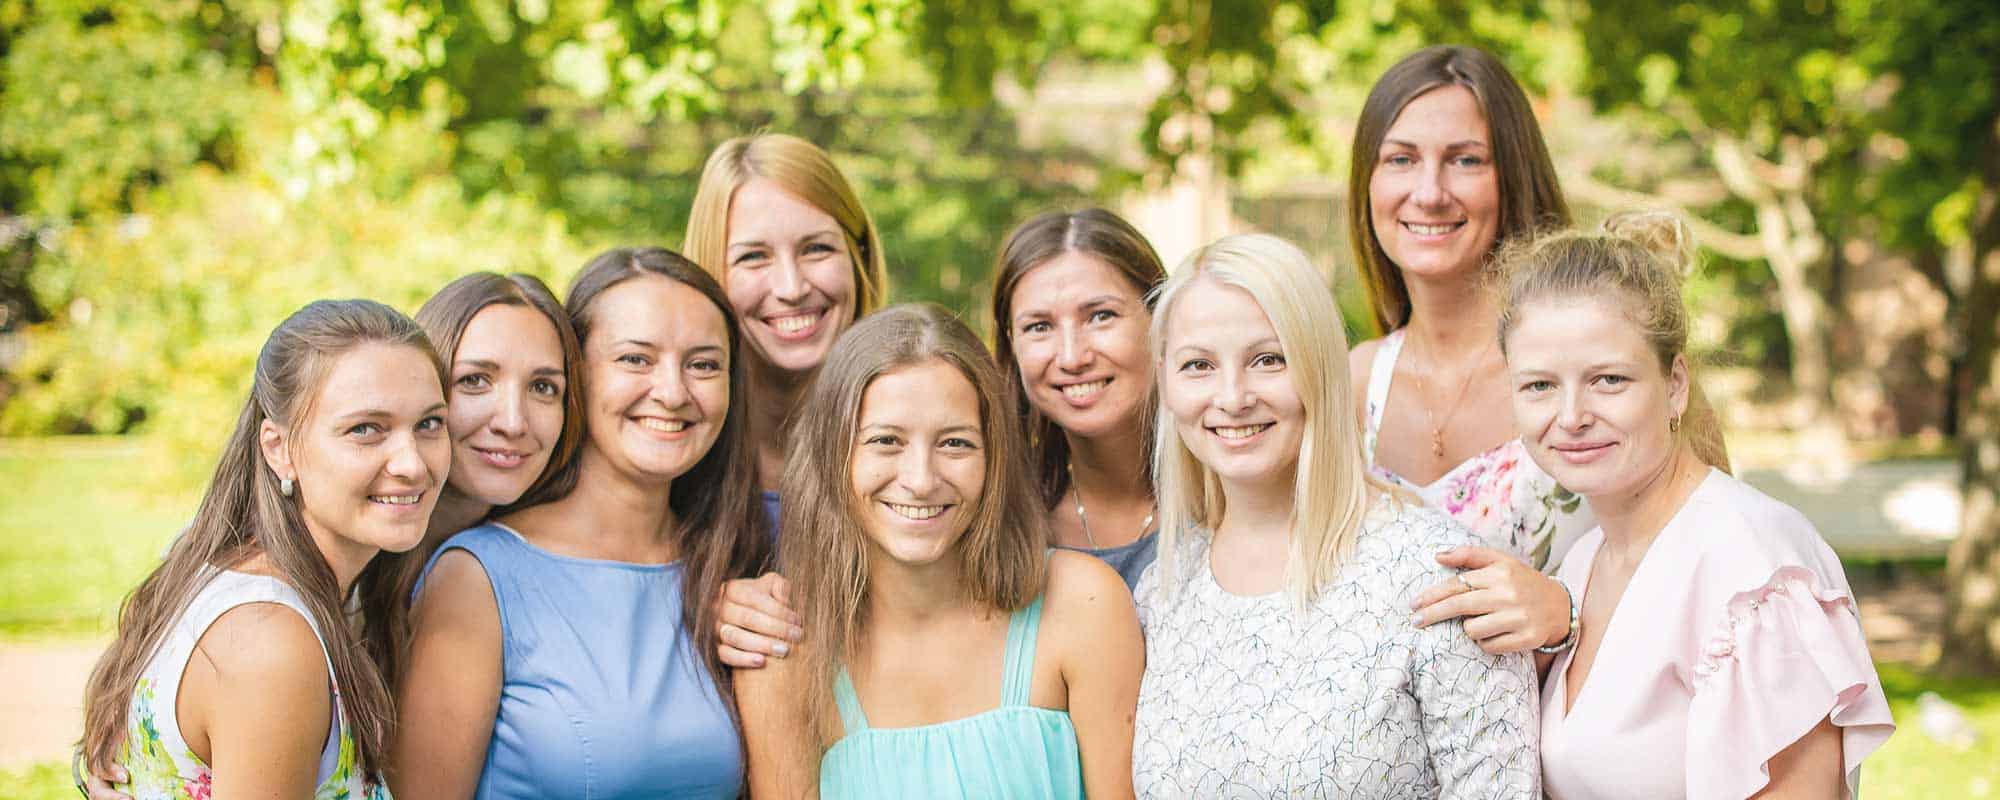 Why do egg donors come to us? Currently 9 of our former egg donors have become our full time Team members — so why not ask them? Here they share with you their values, reasons for donation and own philosophies!